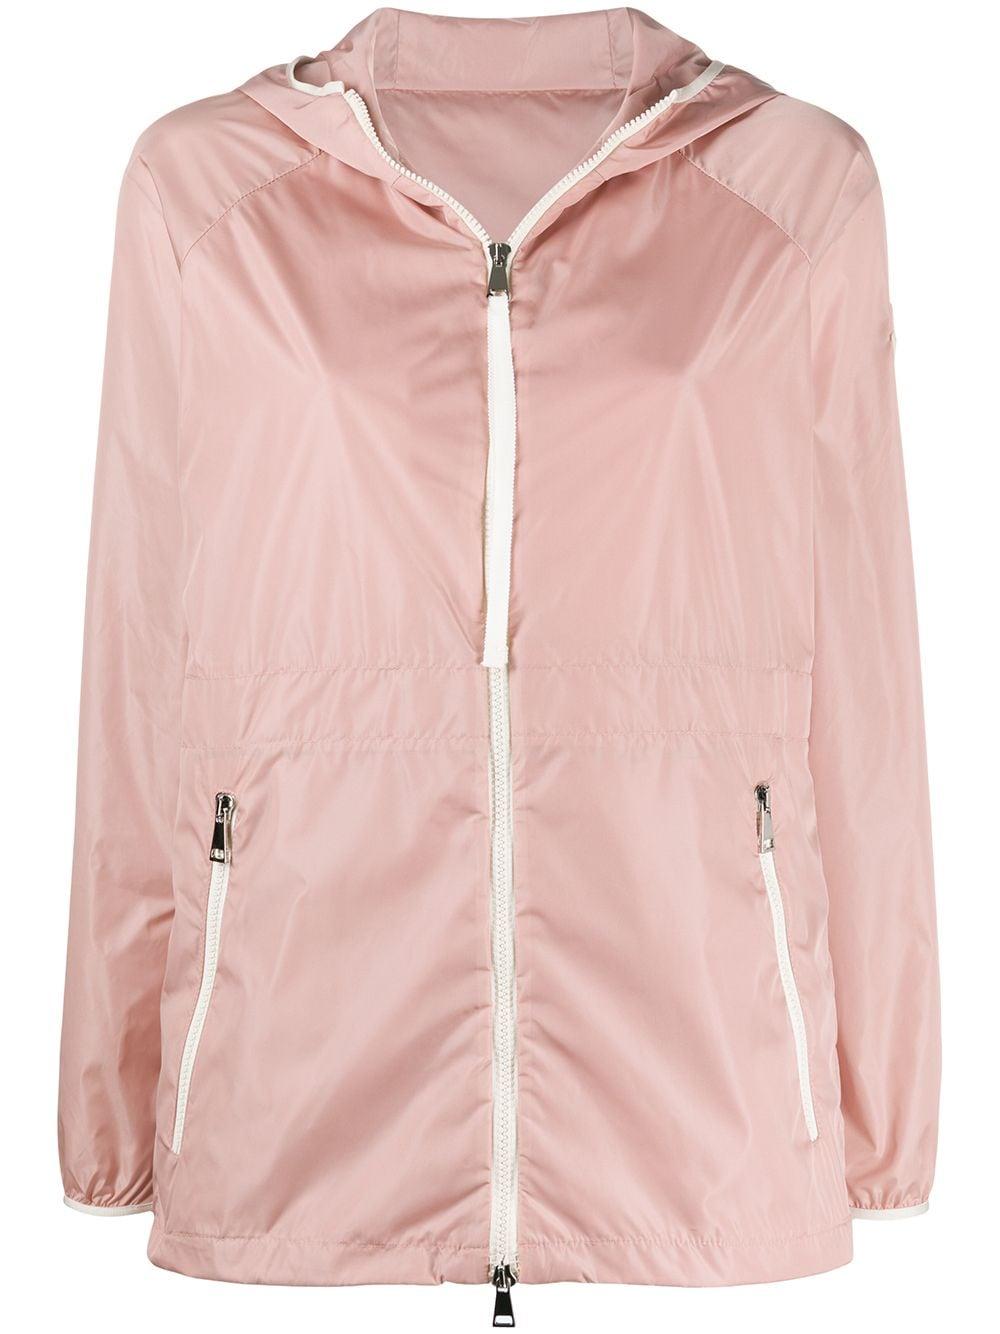 Moncler Lightweight Hooded Jacket in Pink - Save 20% - Lyst